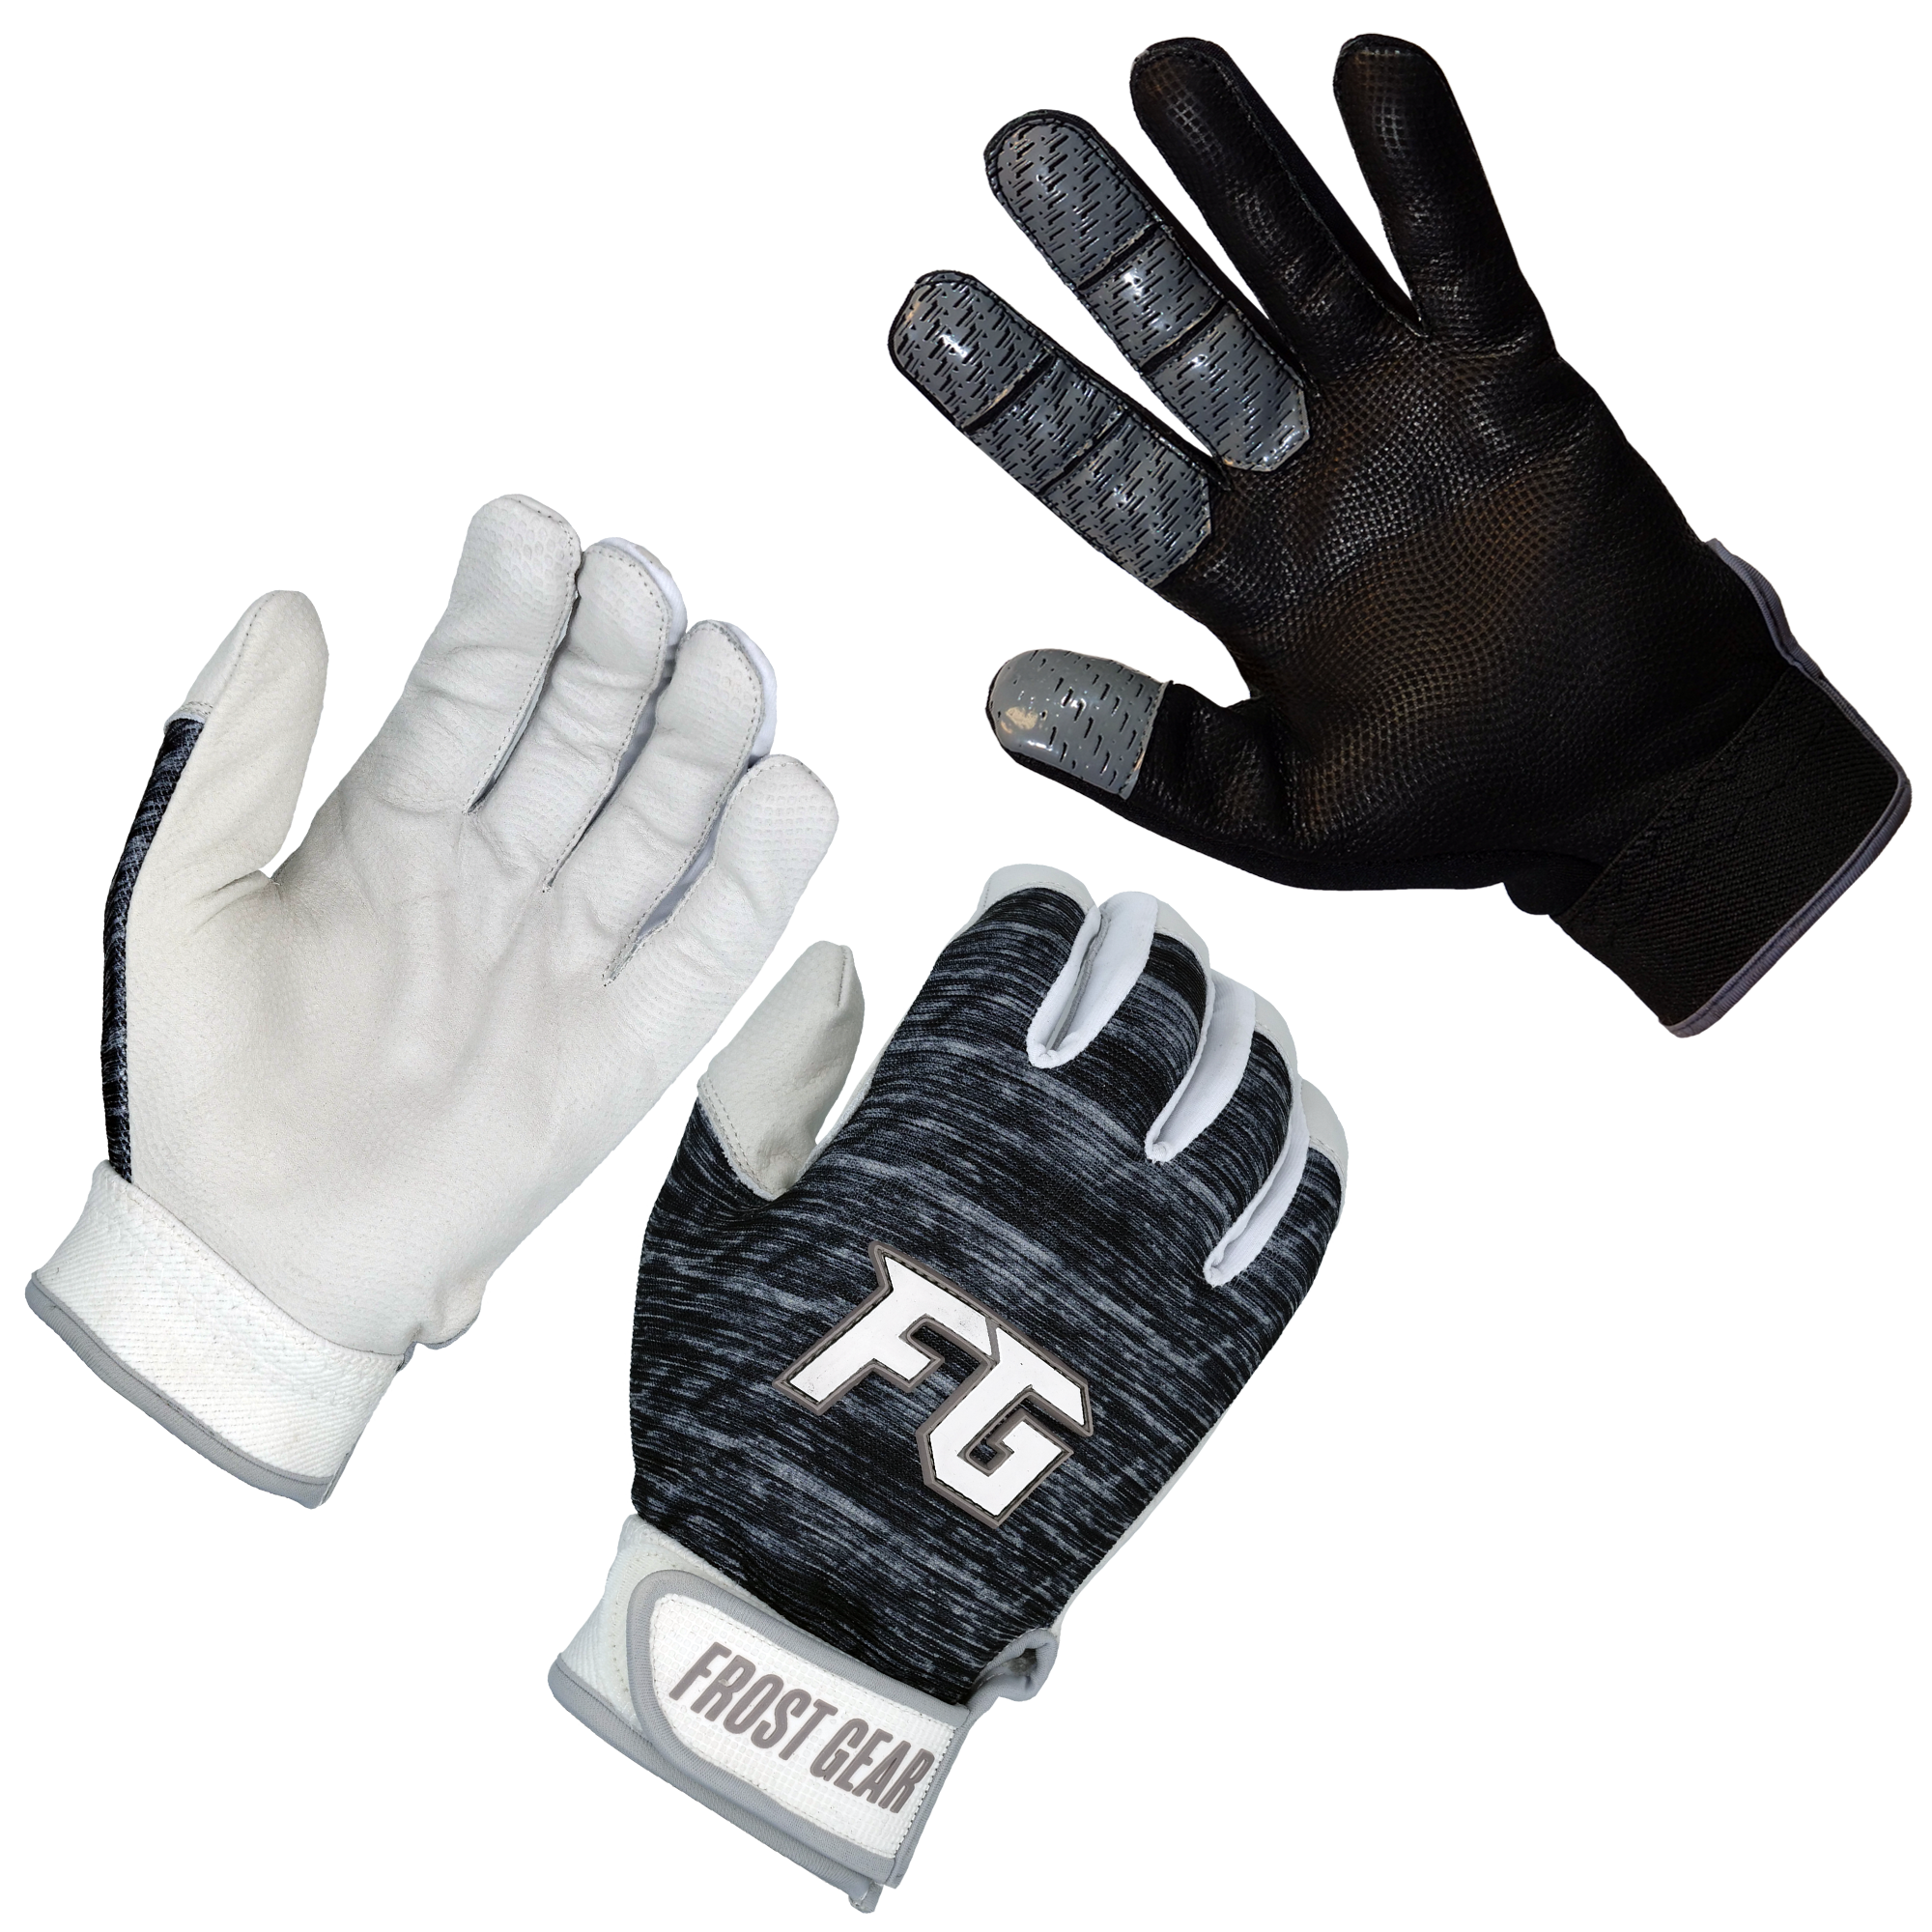 FG Package Deal: Baseball Throwing Glove & Pair of Batting Gloves